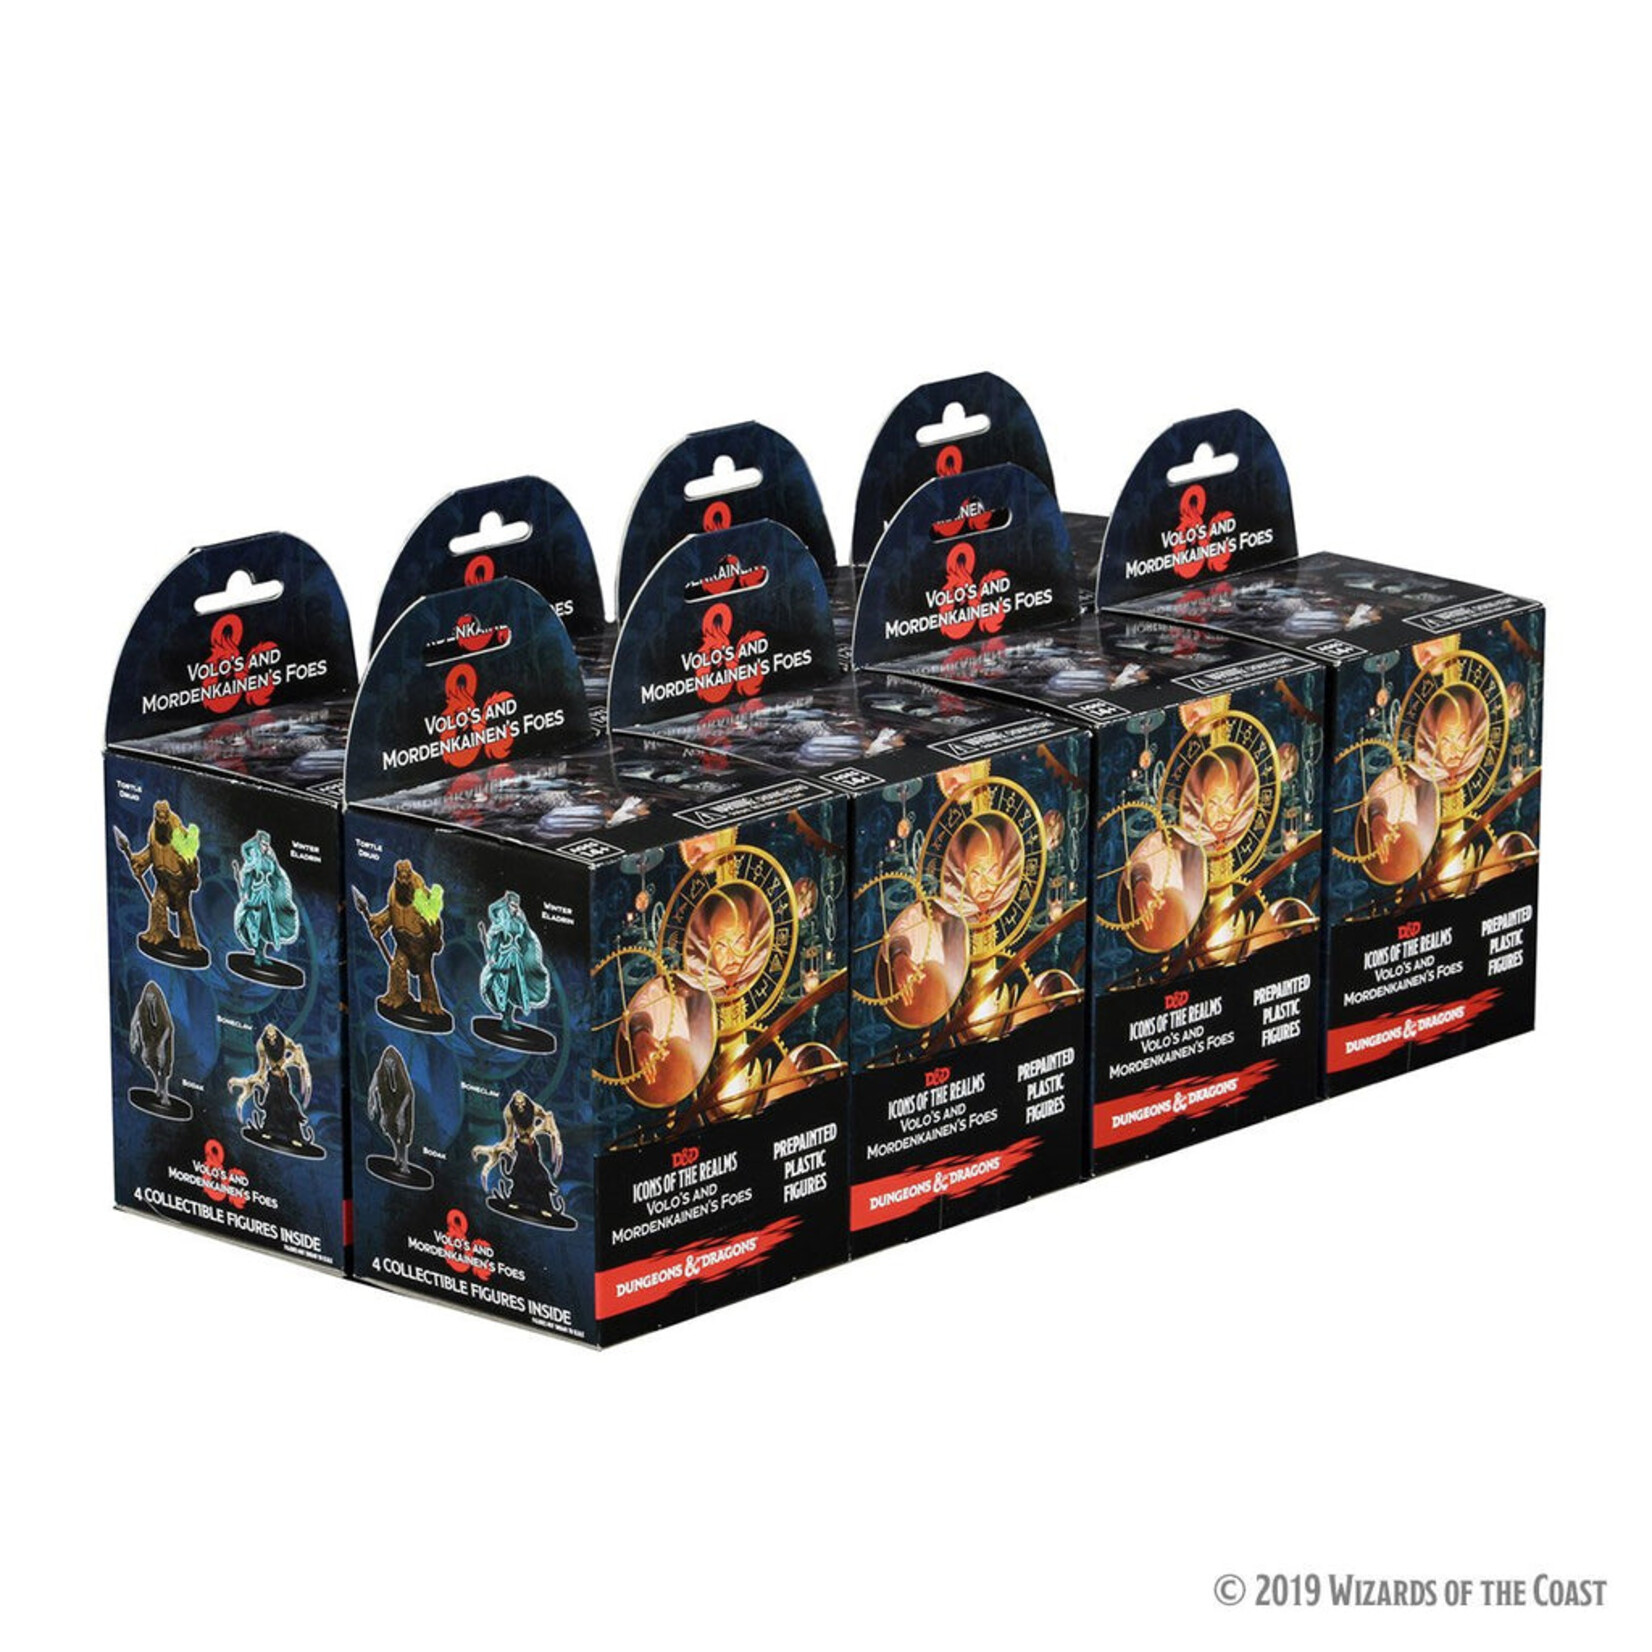 Wizkids D&D Icons of the Realms Volo & Mordenkainen's Foes Booster Brick